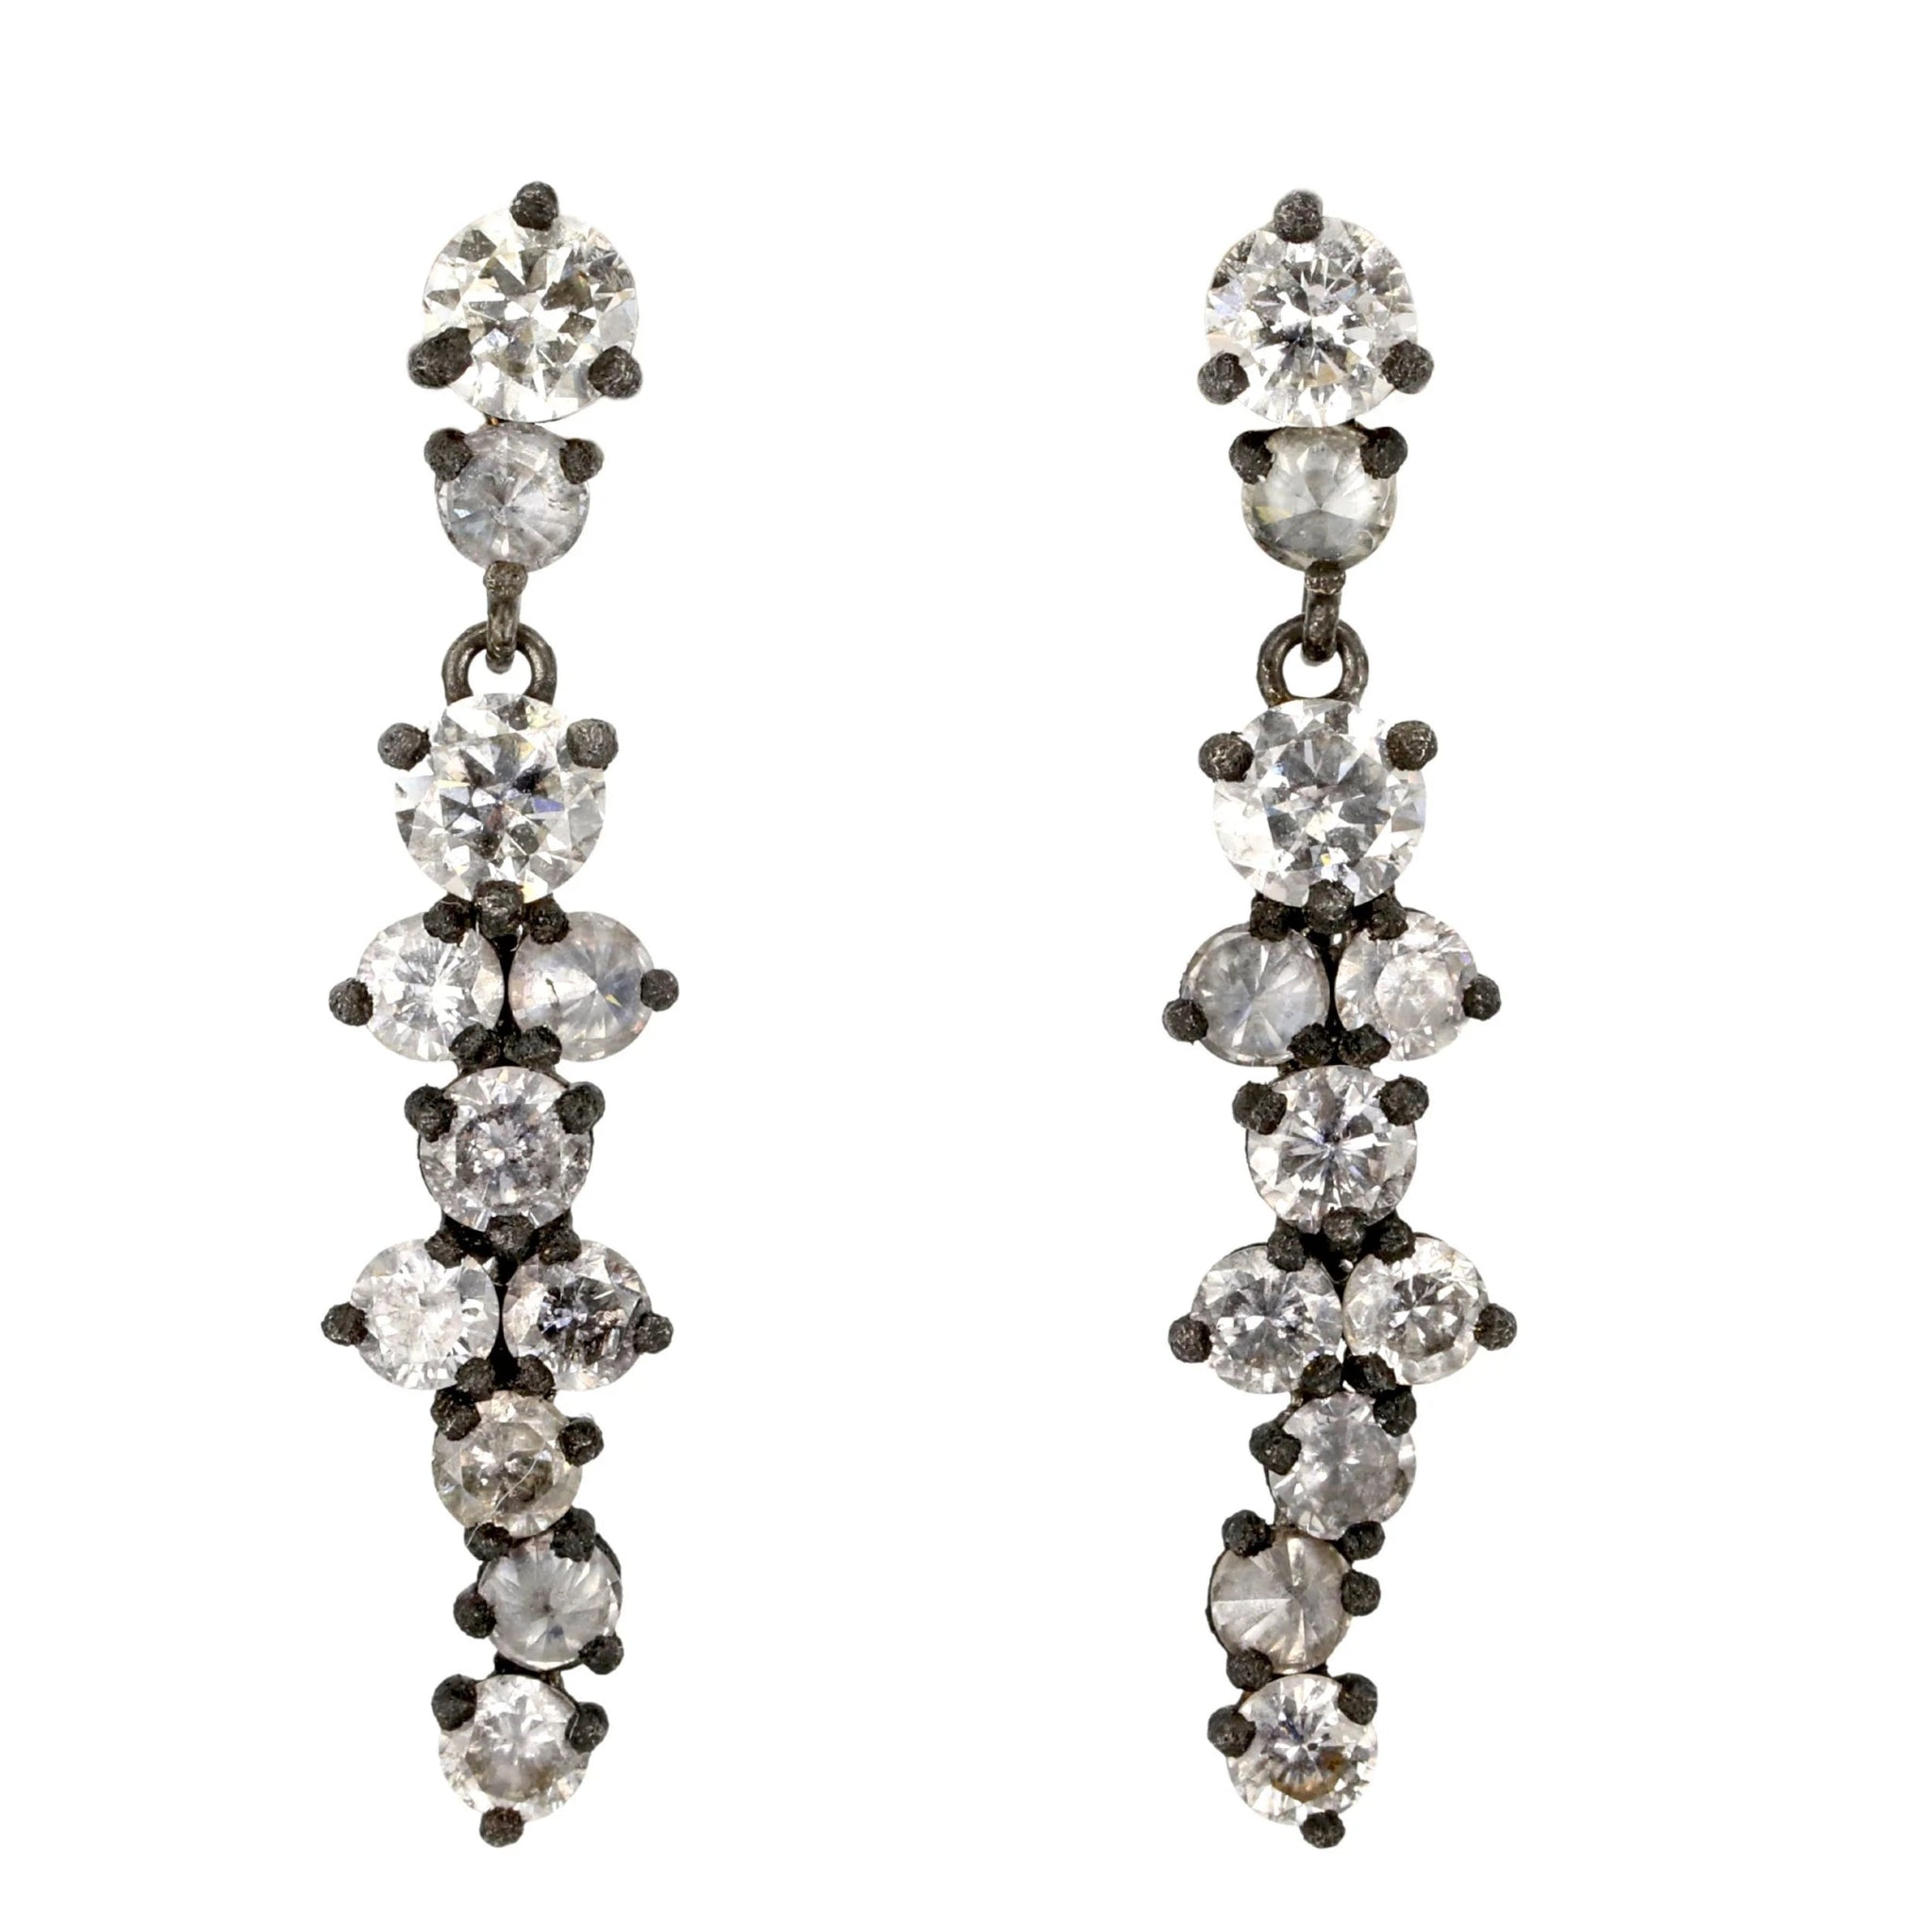 TAP by Todd Pownell Small Blackened White Gold Prong-Set Diamond Cluster Drop Earrings